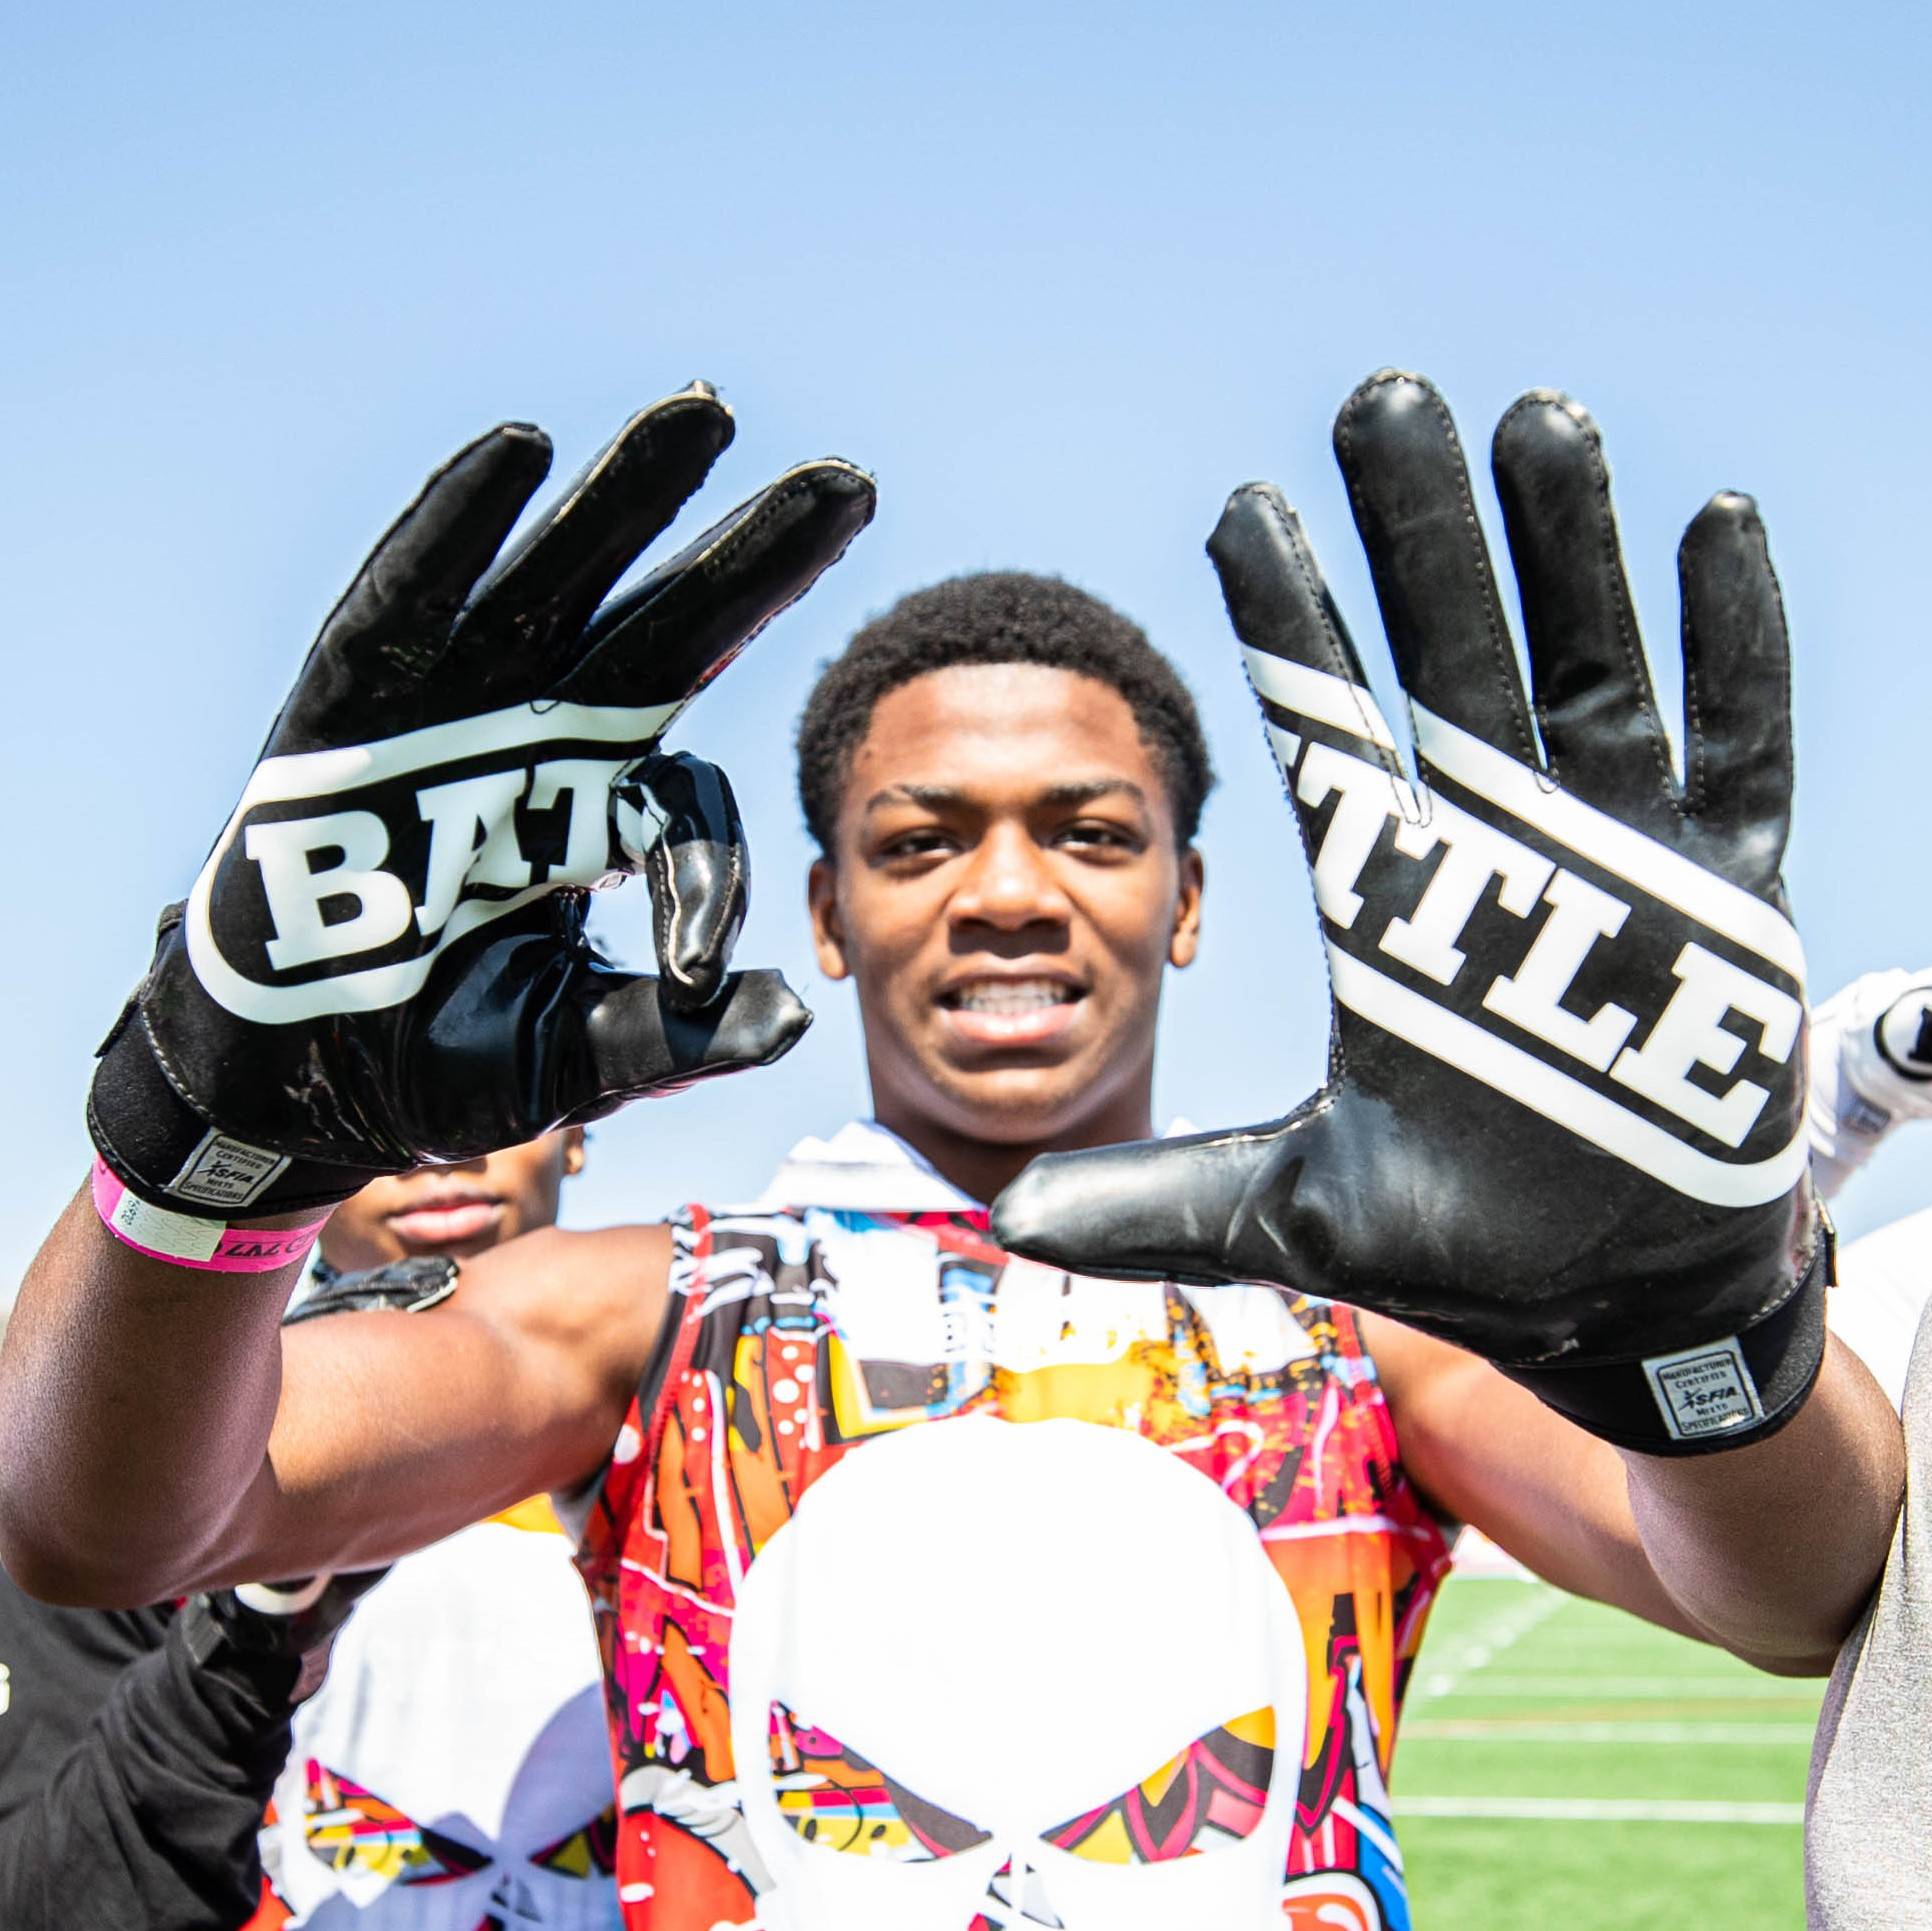 Battle Double Threat Youth Football Receivers Gloves, Football Gloves